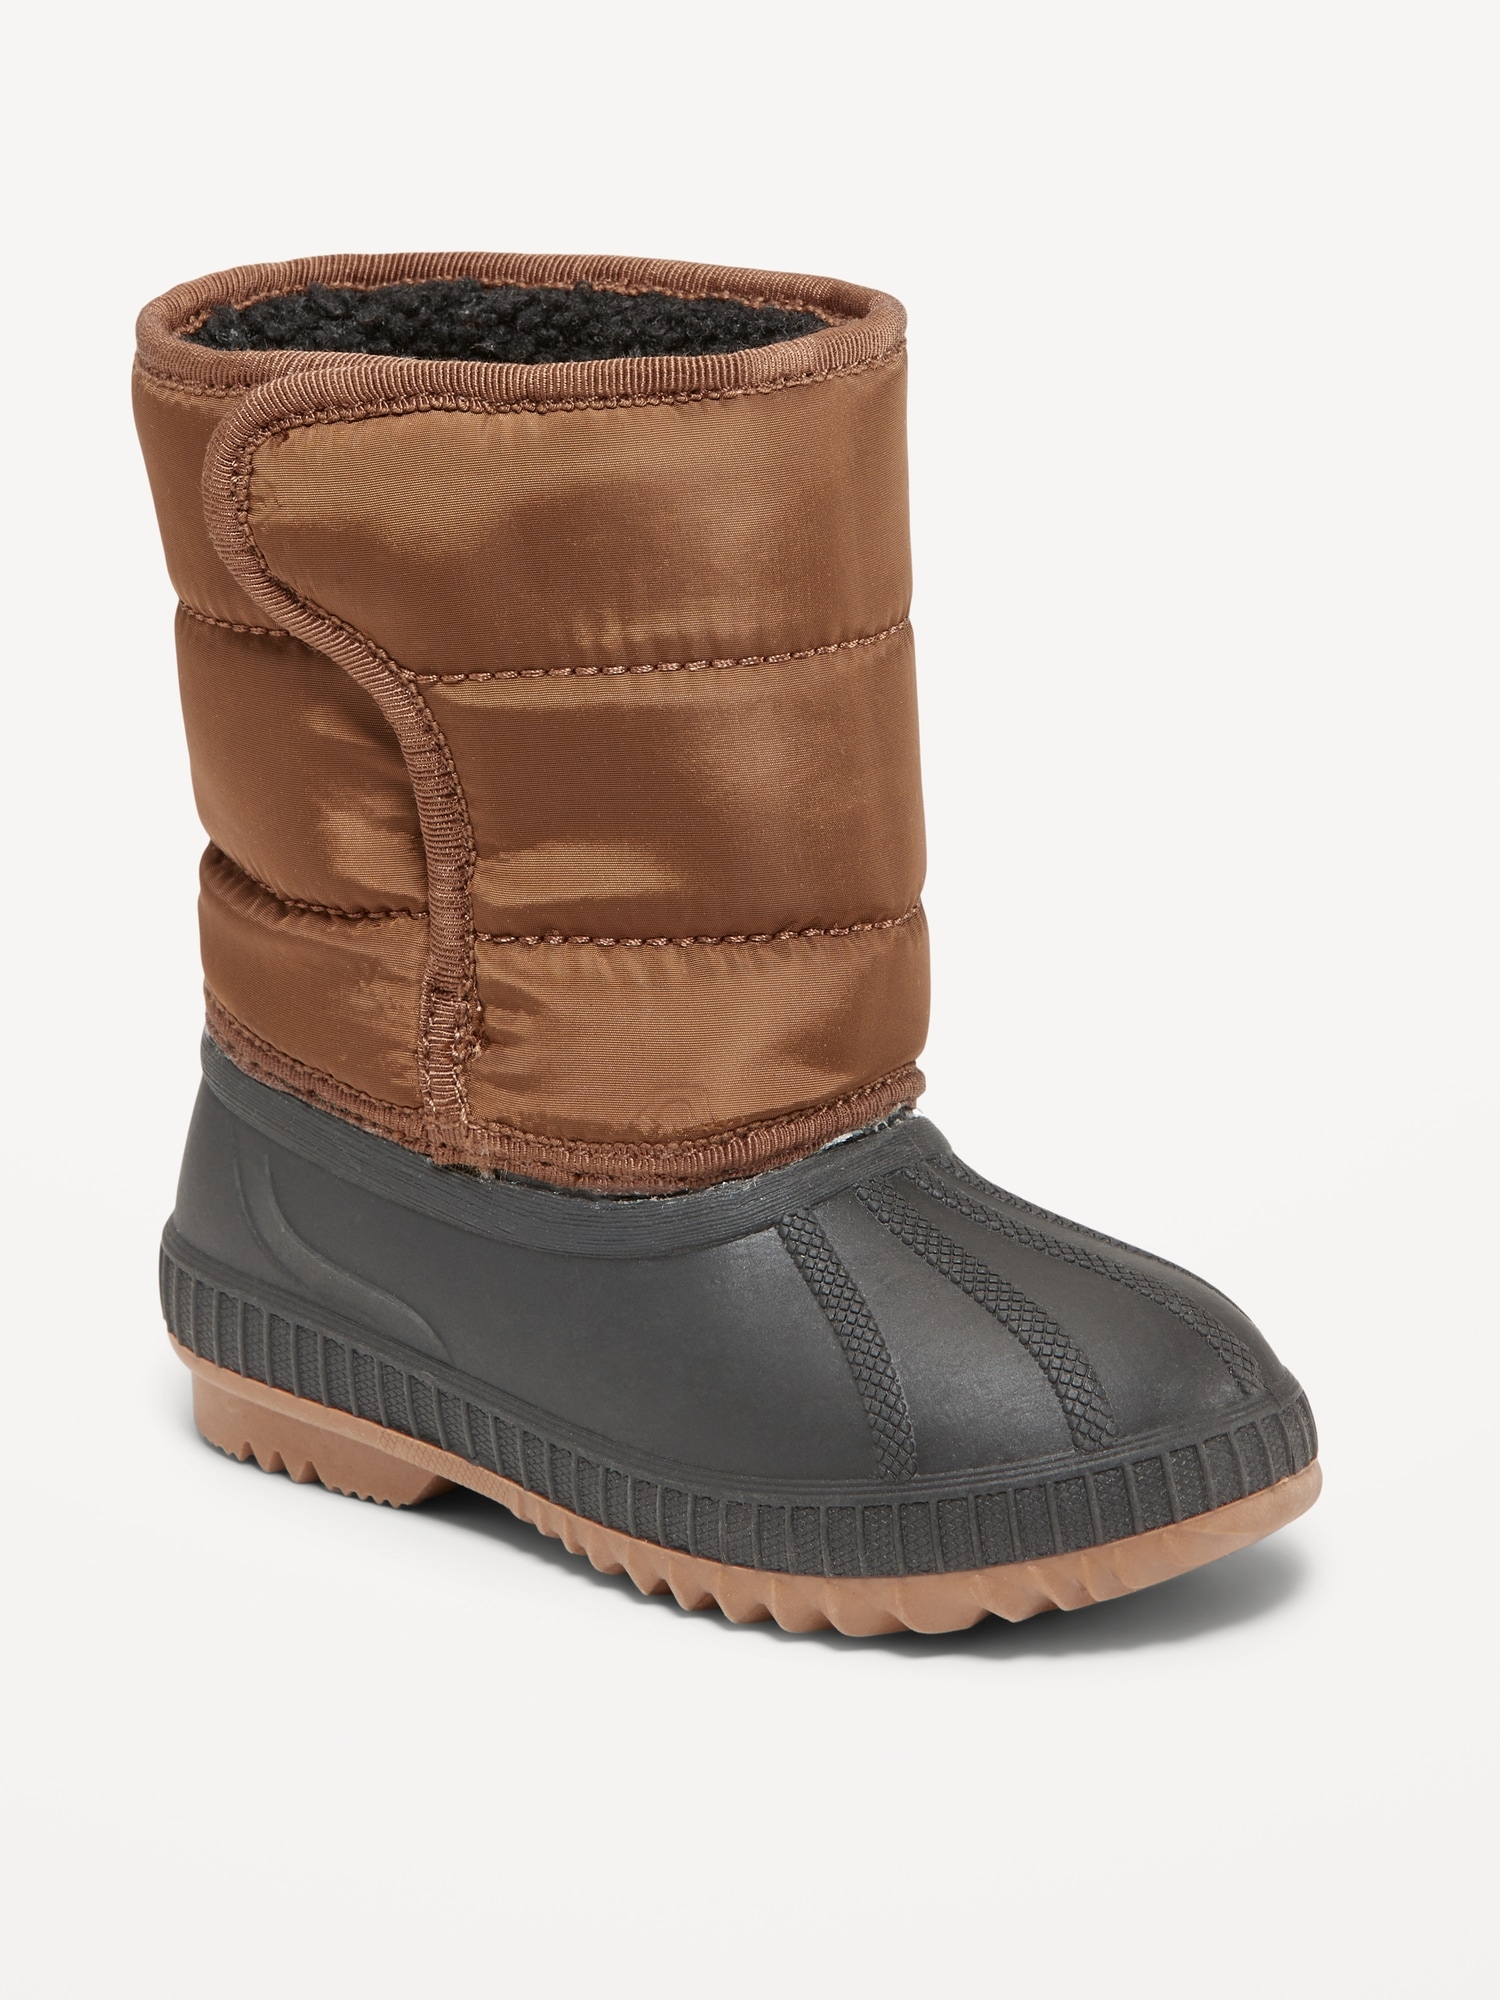 Oldnavy Color-Block Duck Boots for Toddler Boys